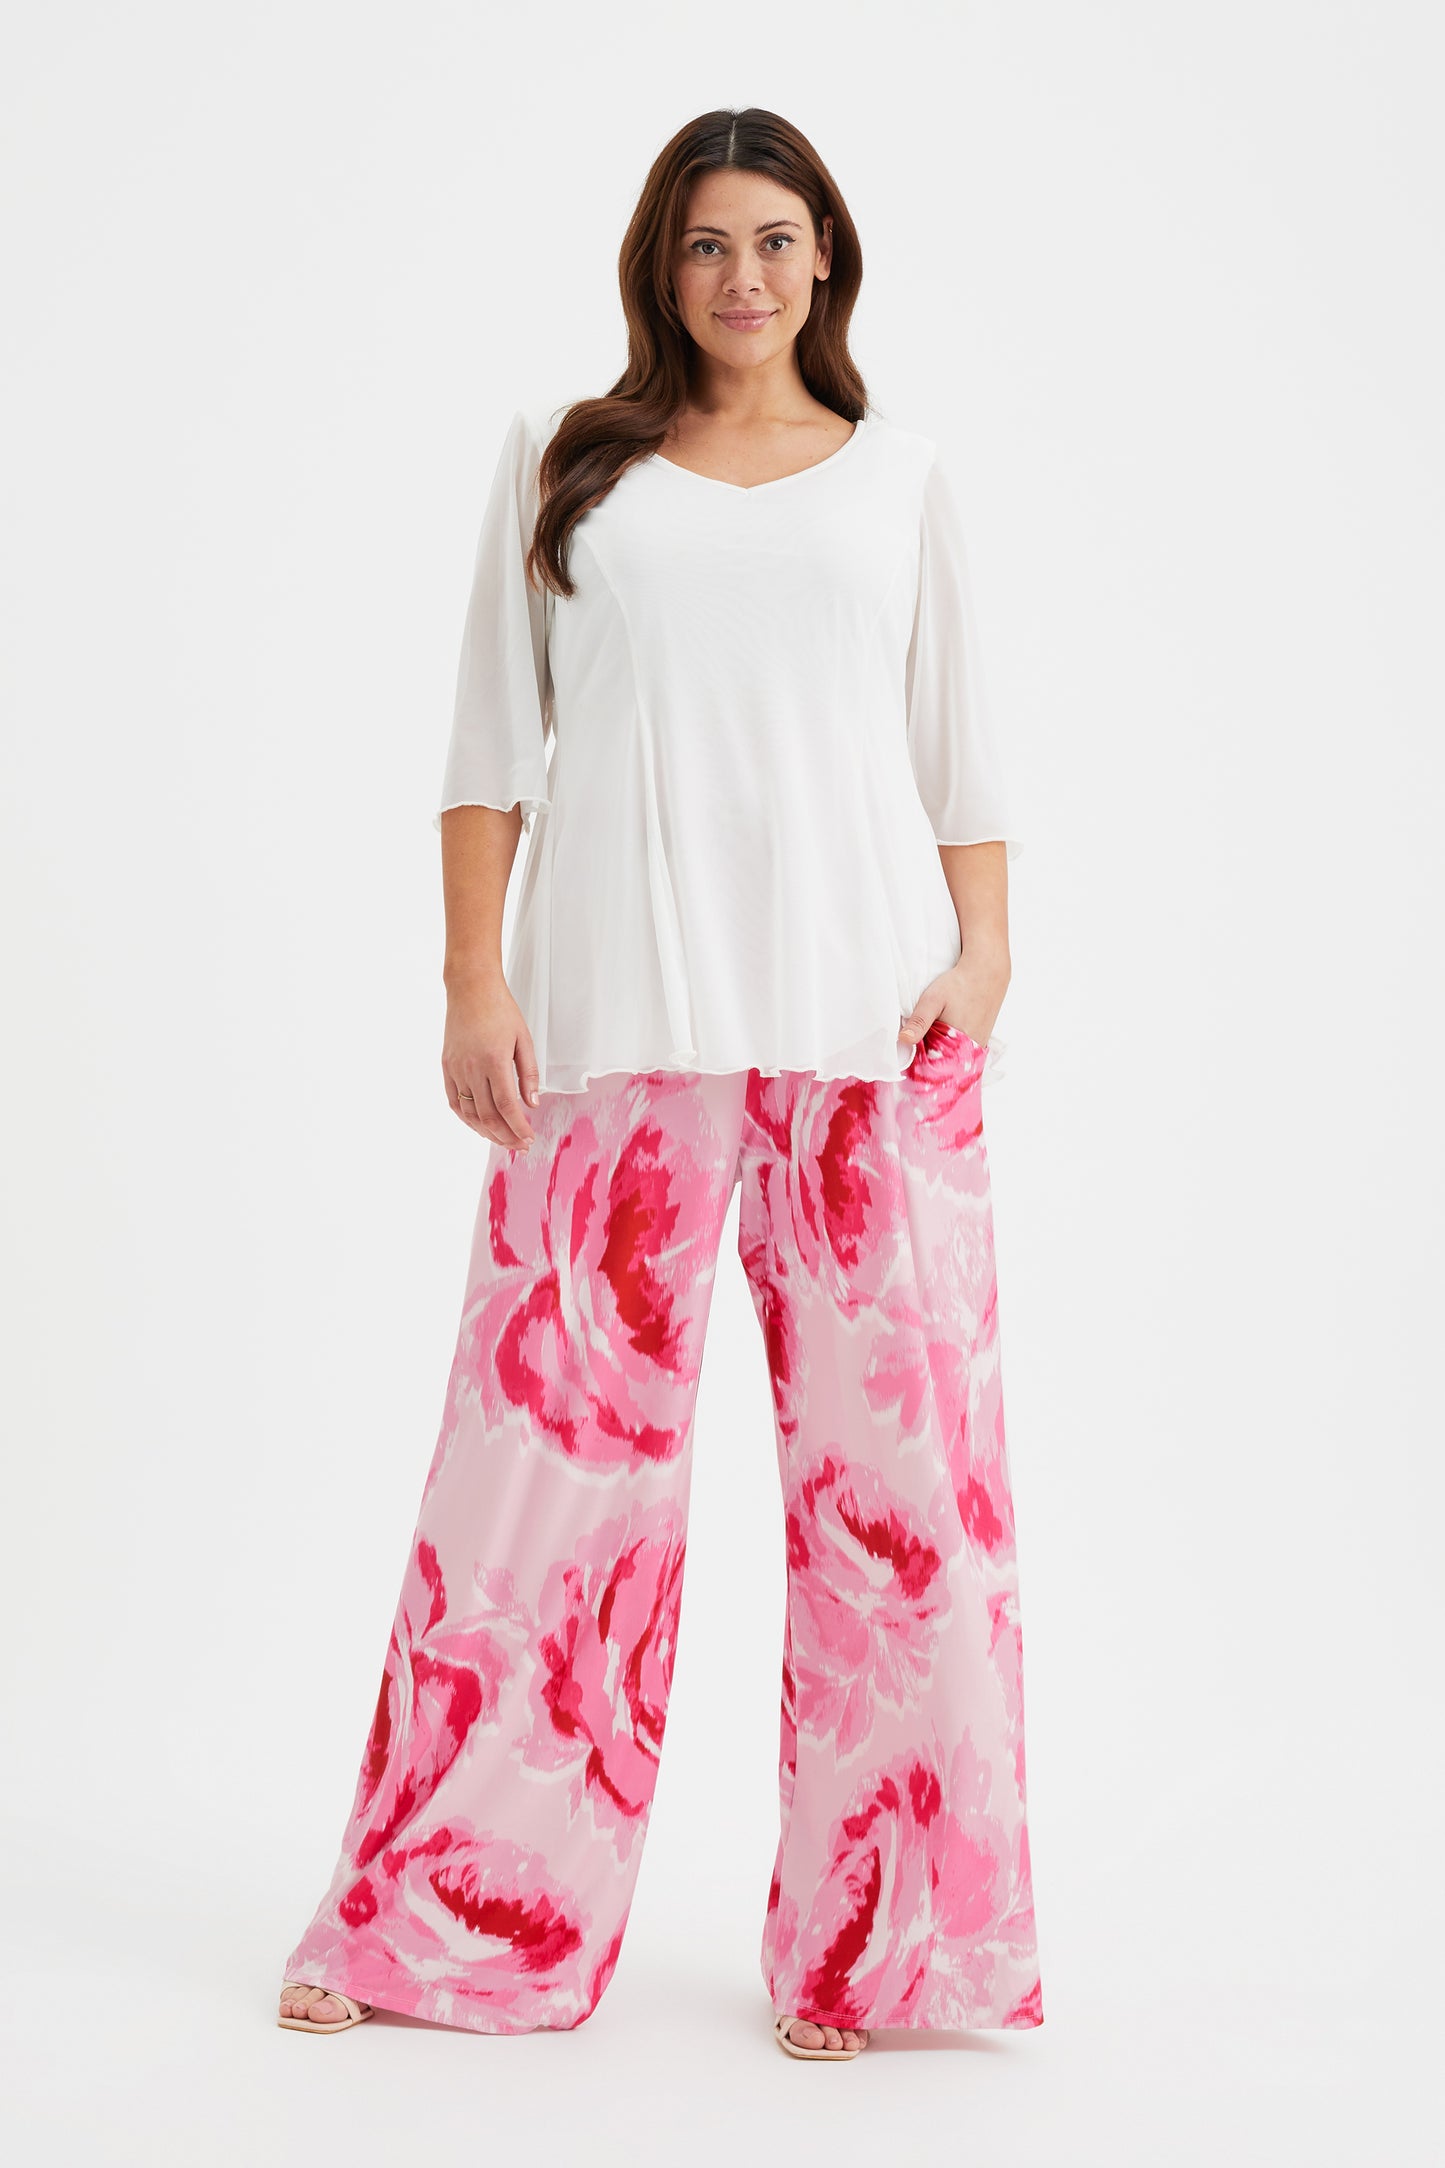 The Pink Rose Bette Lounge Pant